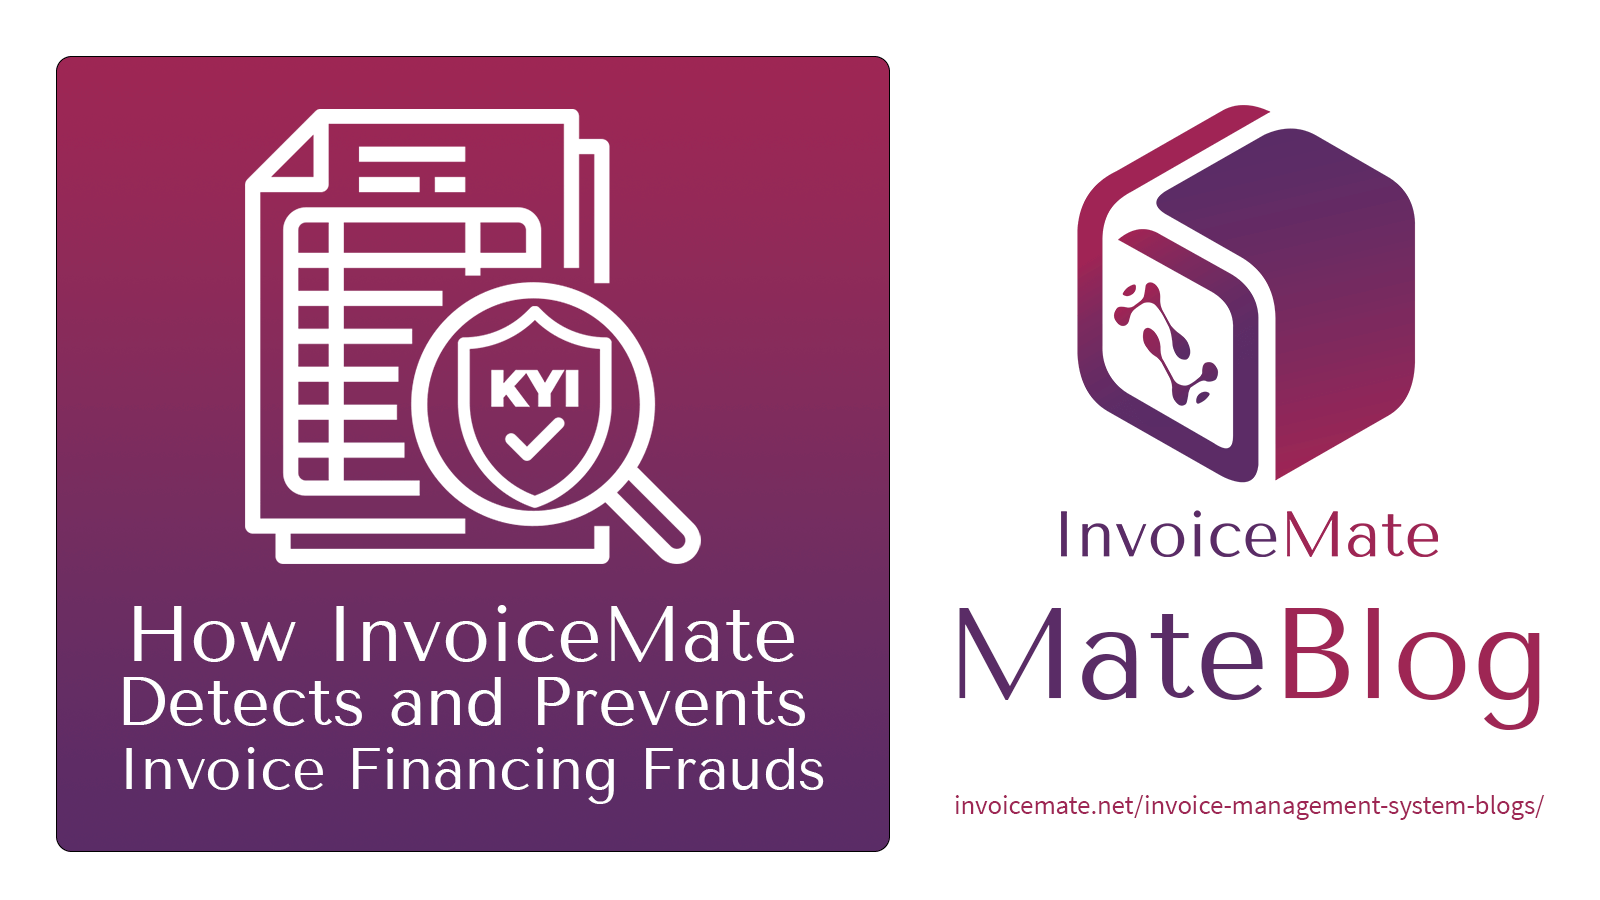 How InvoiceMate Detects and Prevents Invoice Financing Frauds